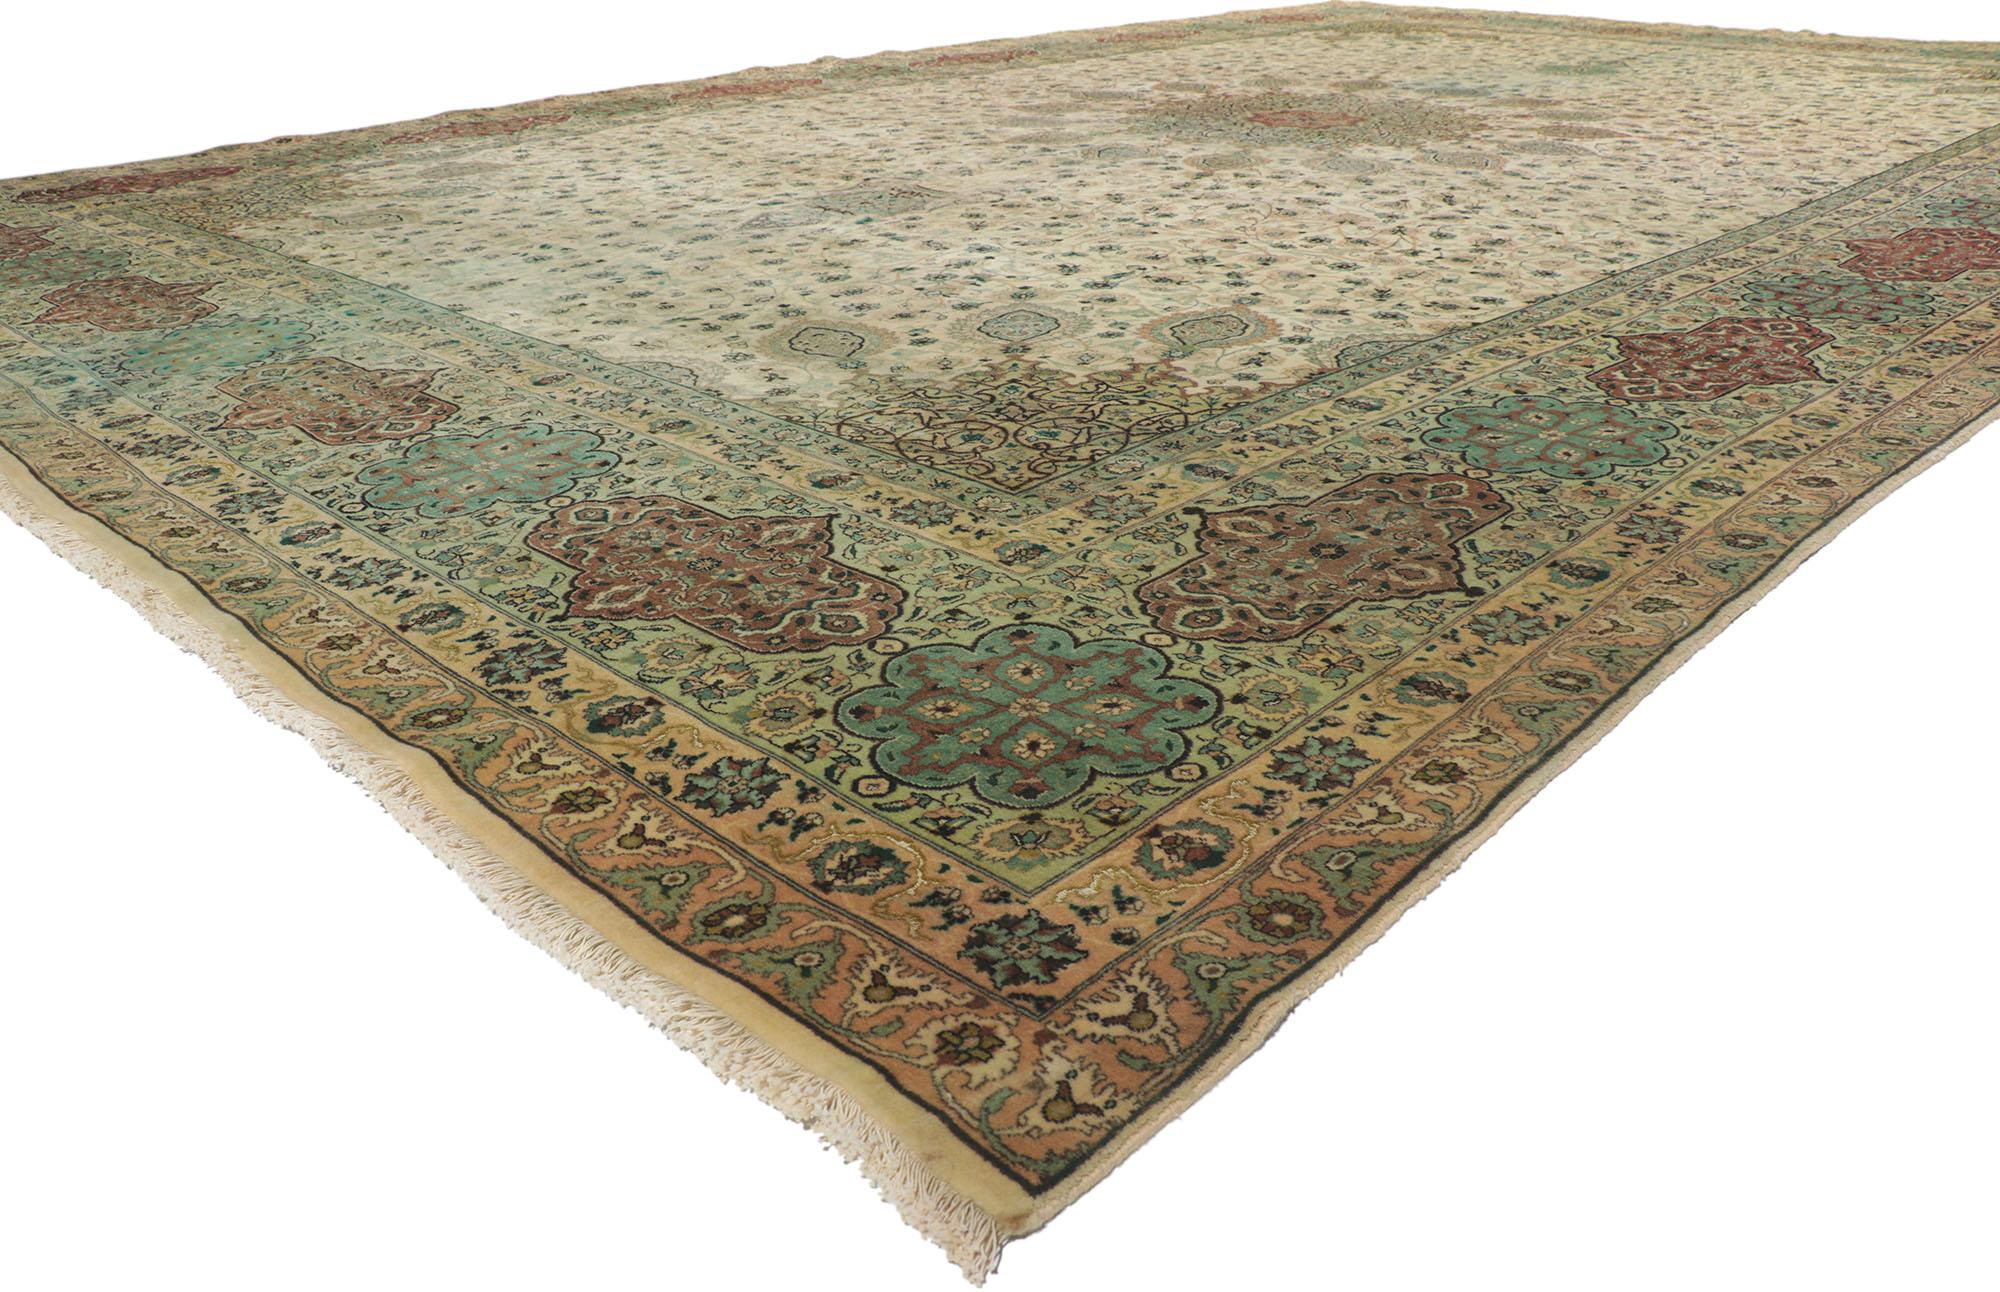 77744 vintage Persian Tabriz Palace rug 12'06 x 19'01. Inspired from The Ardabil Carpet from the Safavid Dynasty, this hand-knotted wool vintage Persian Tabriz area rug features a beige circular 16-point center medallion flanked by a ring of sixteen